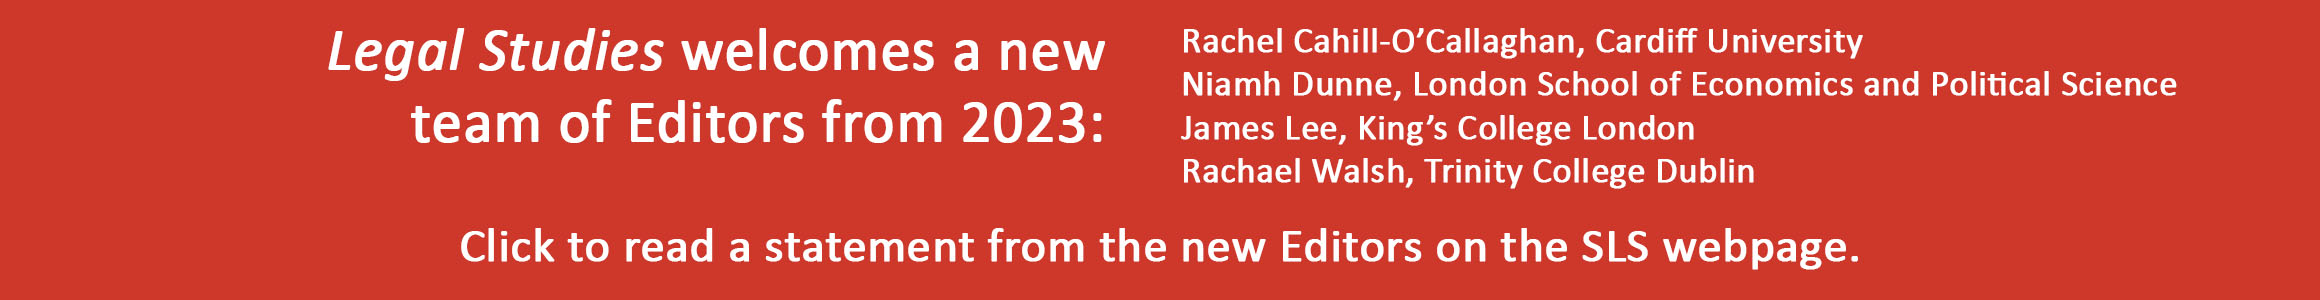 Banner listing new editorial team for Legal Studies from 2023